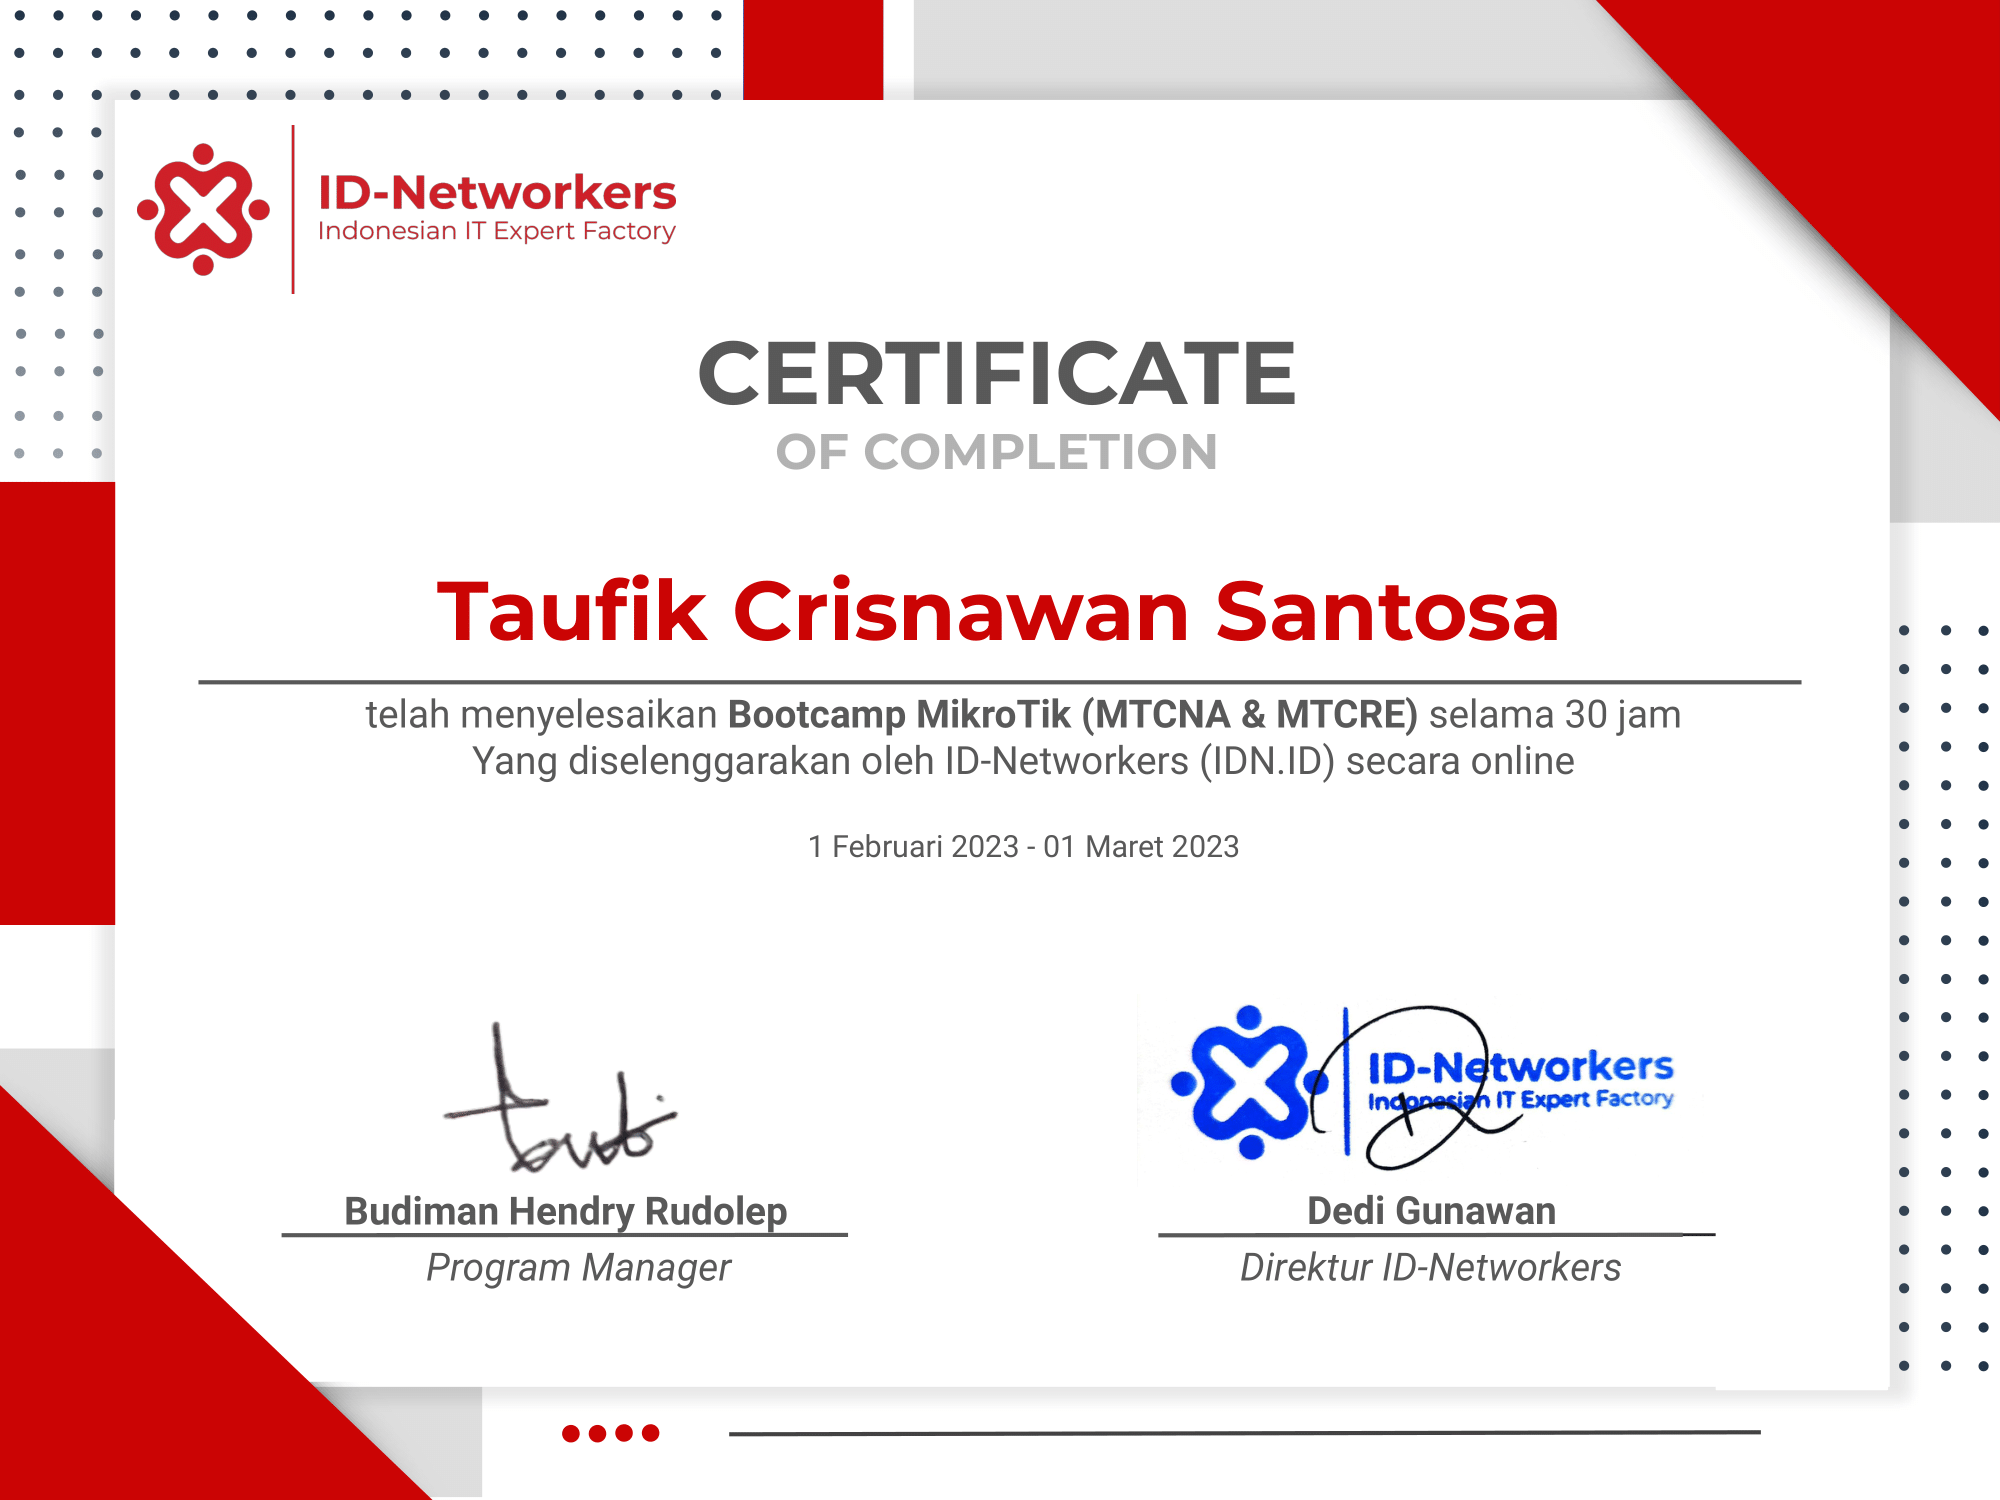 Bootcamp Mikrotik (MTCNA & MTCRE) - ID Networkers certificate